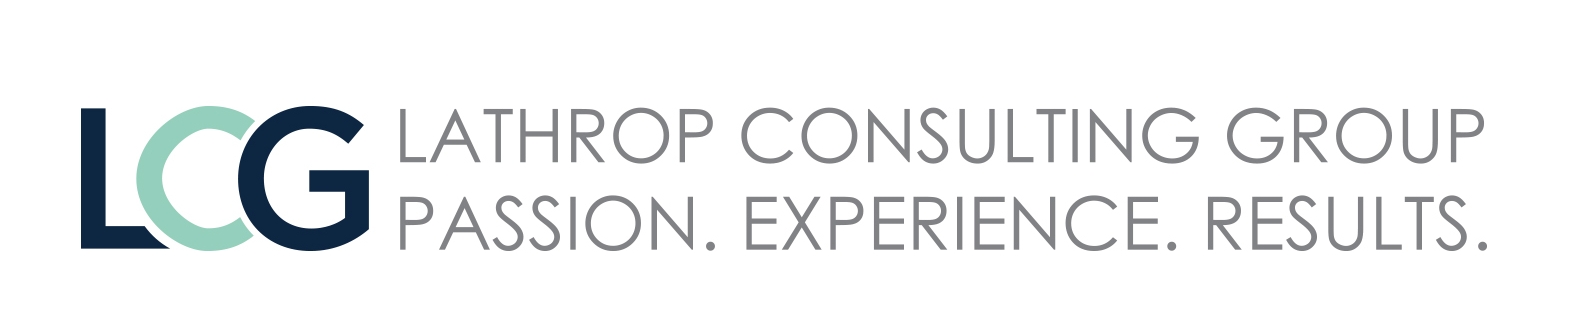 Lathrop Consulting Group